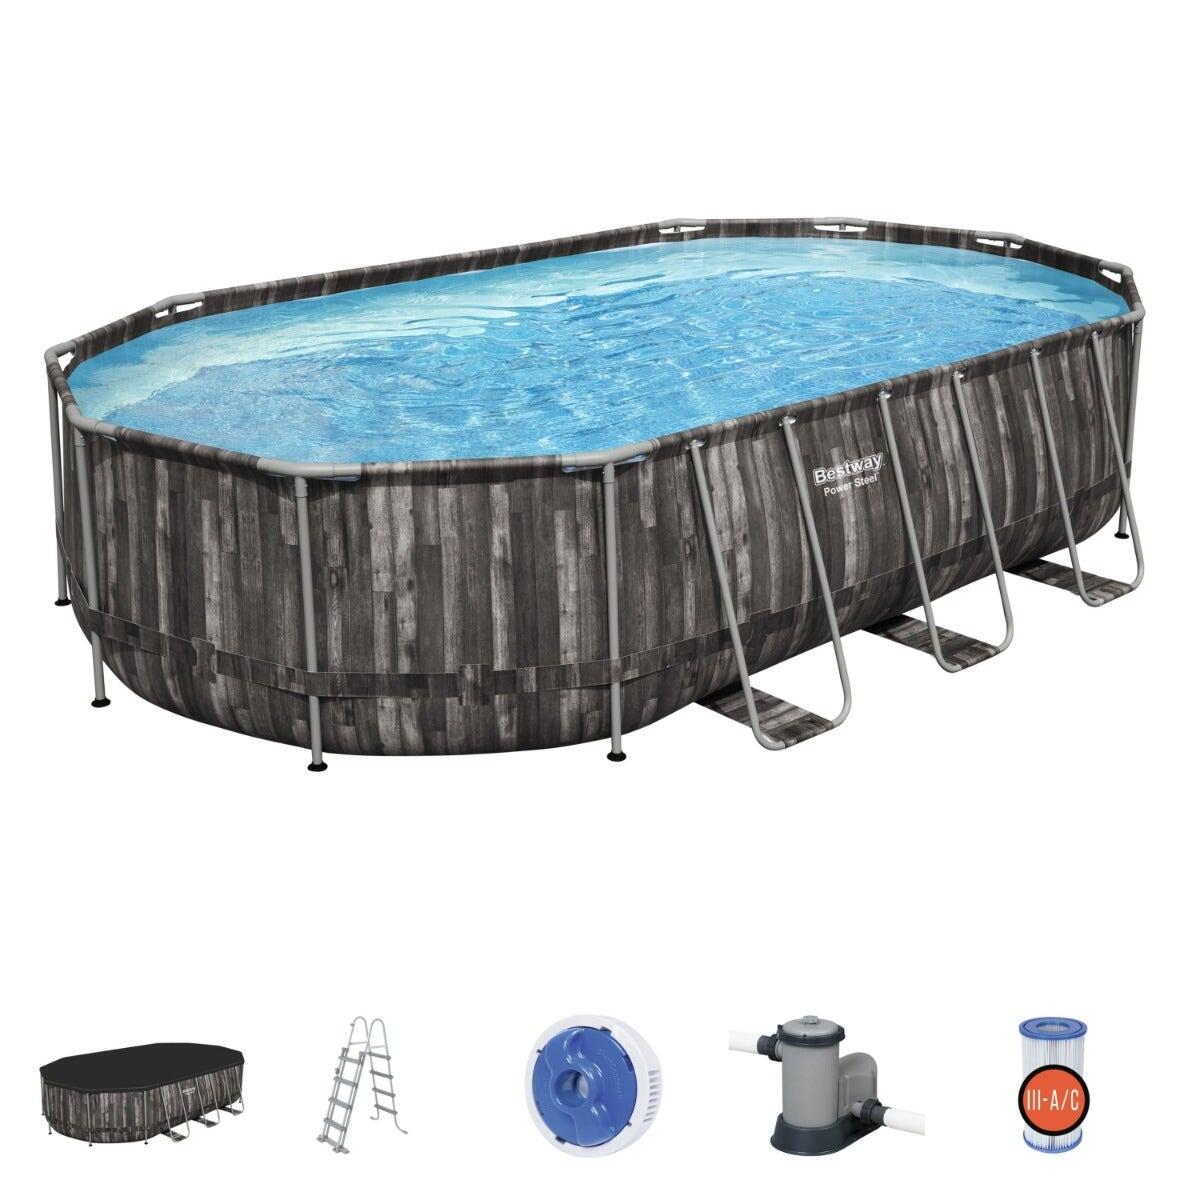 Bestway Power Steel Oval 20ft x 12ft x 48" Above Ground Swimming Pool 3/7